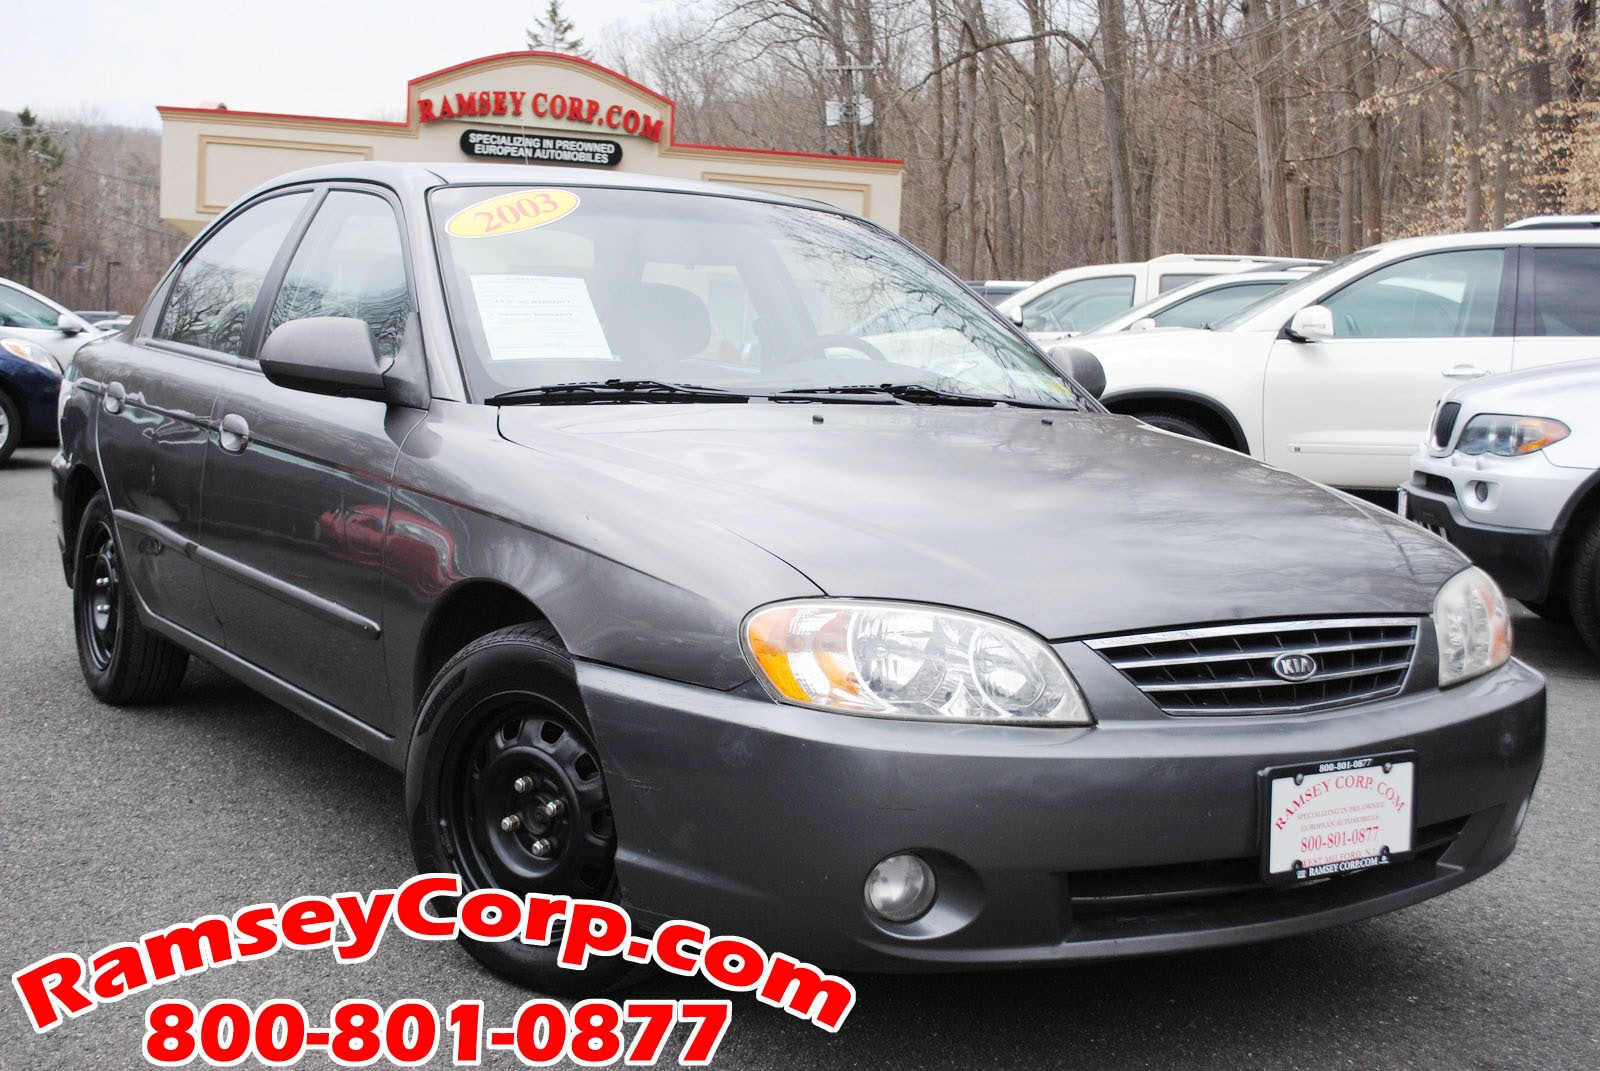 Used 2003 Kia Spectra For Sale at Ramsey Corp. | VIN: KNAFB121735222717